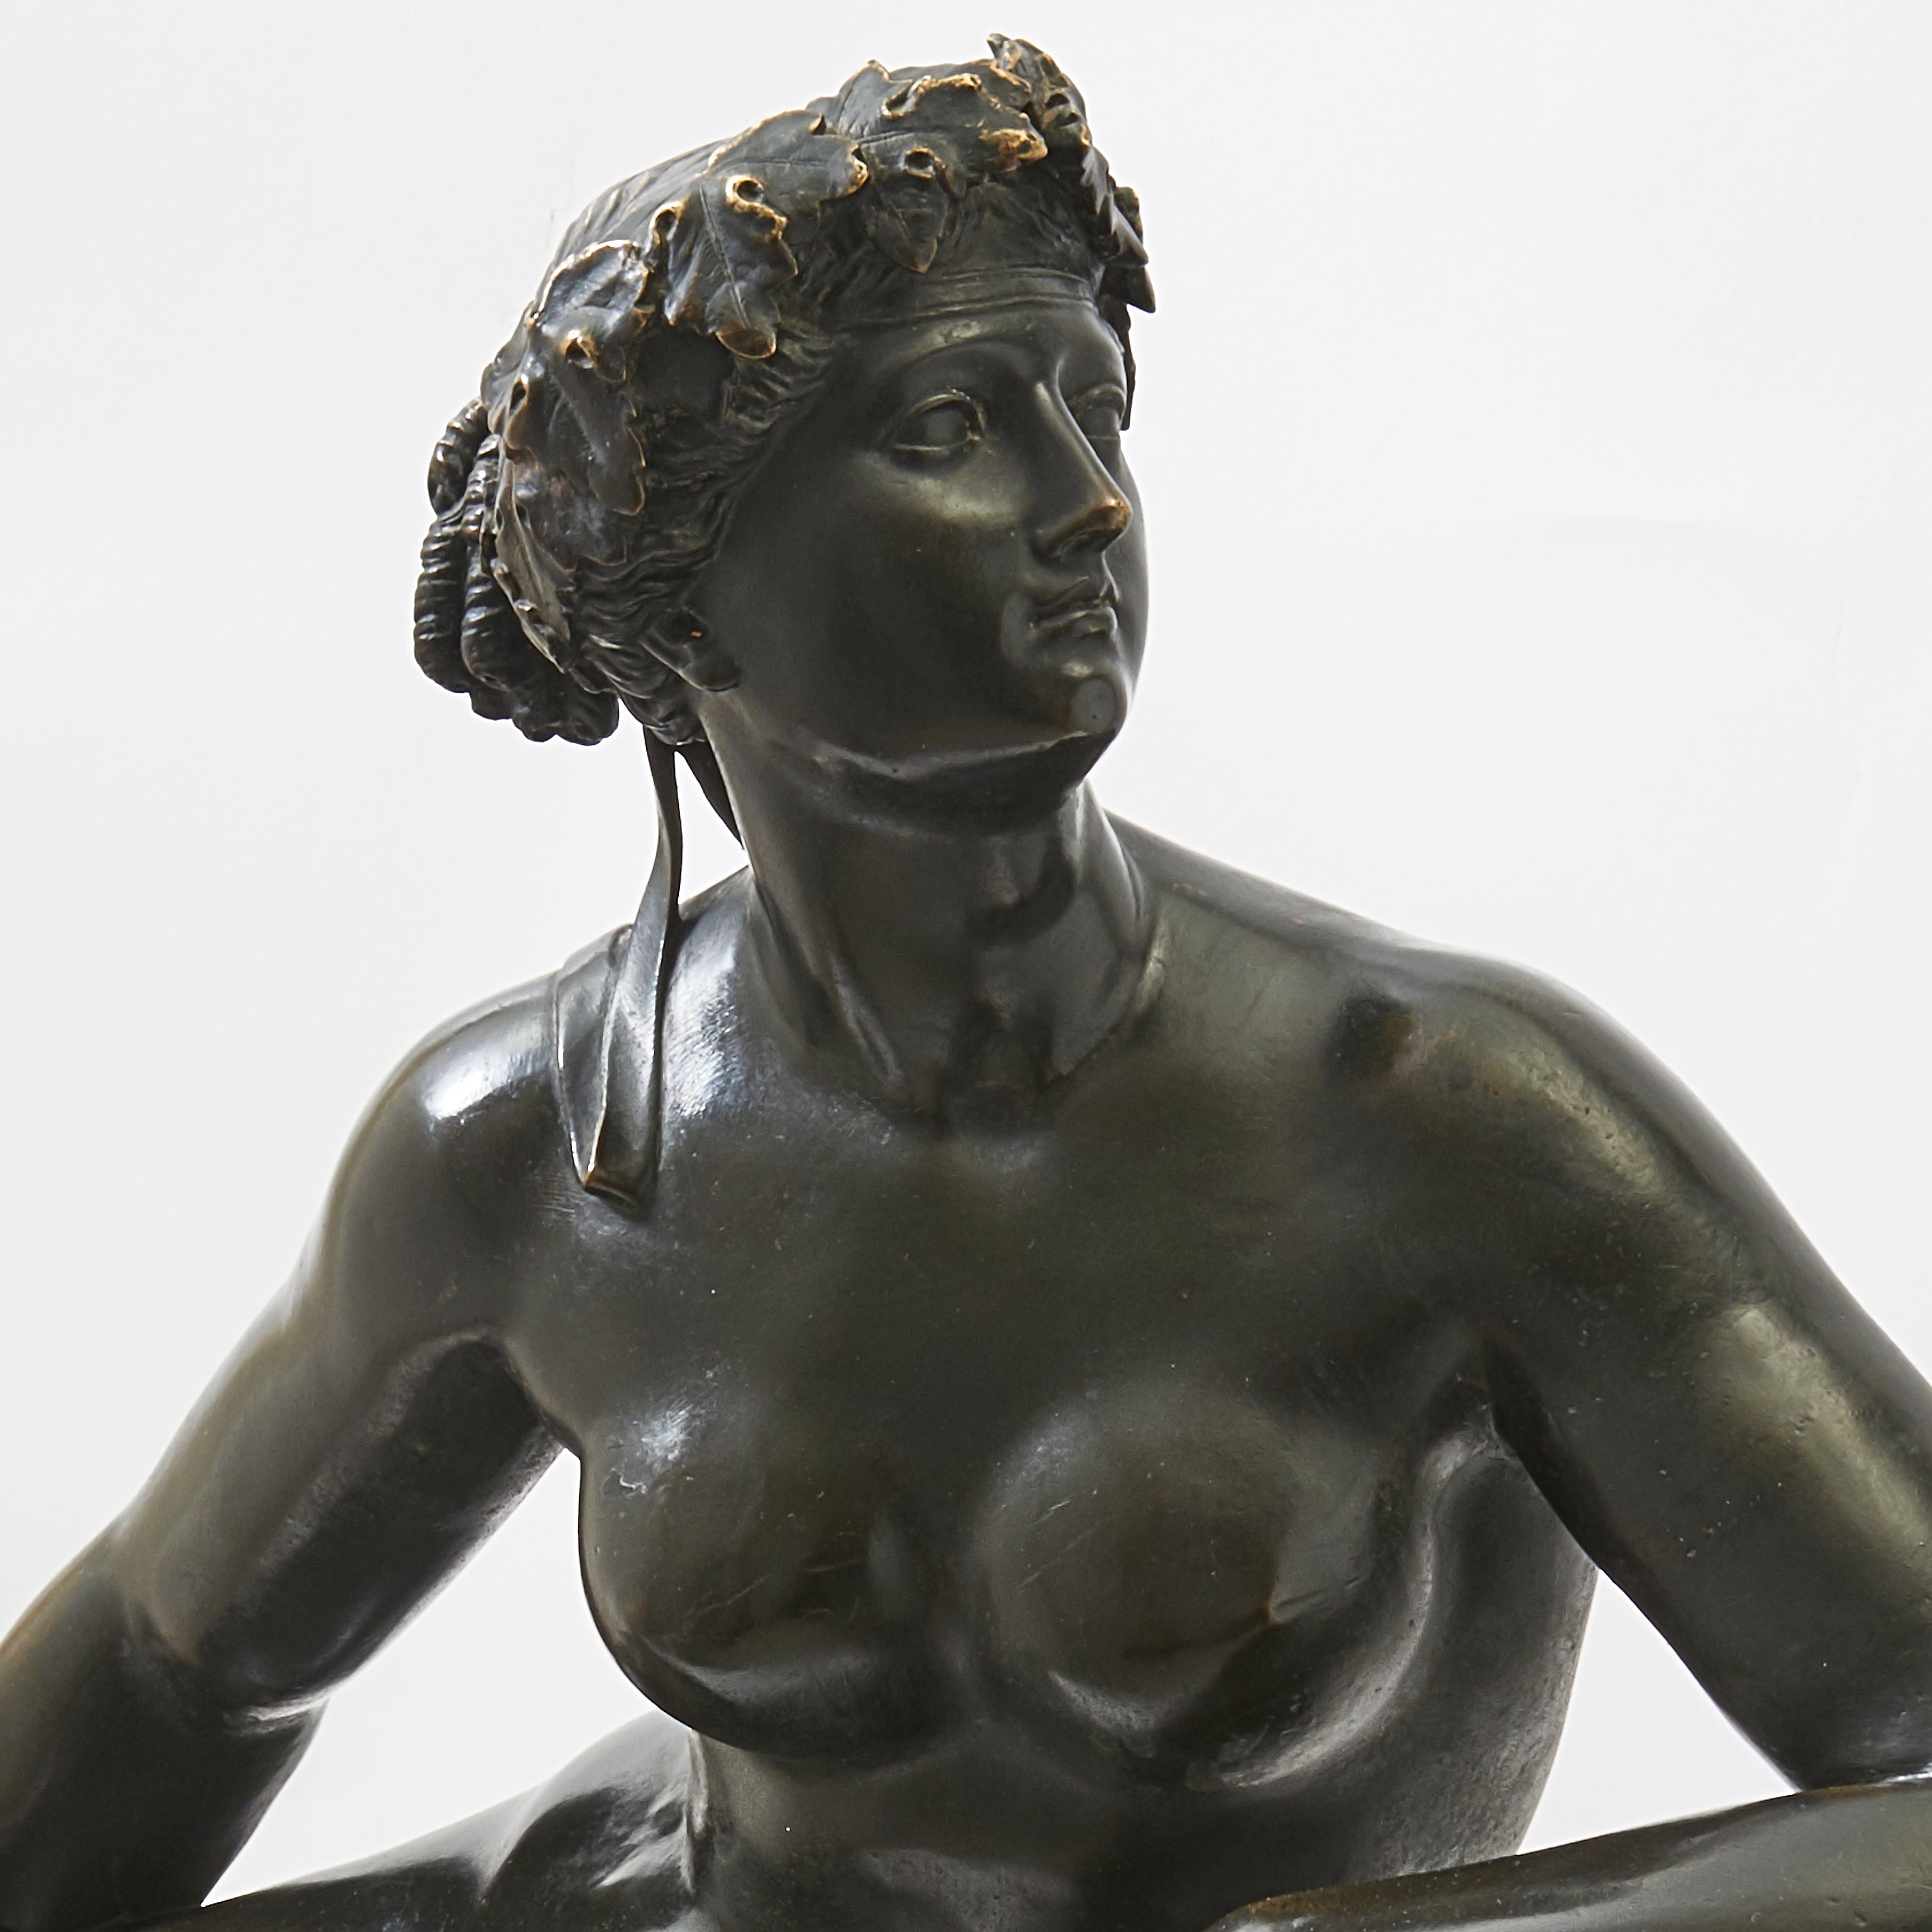 A 19th Century French Bronze Sculpture of “Ariadne on the Panther”